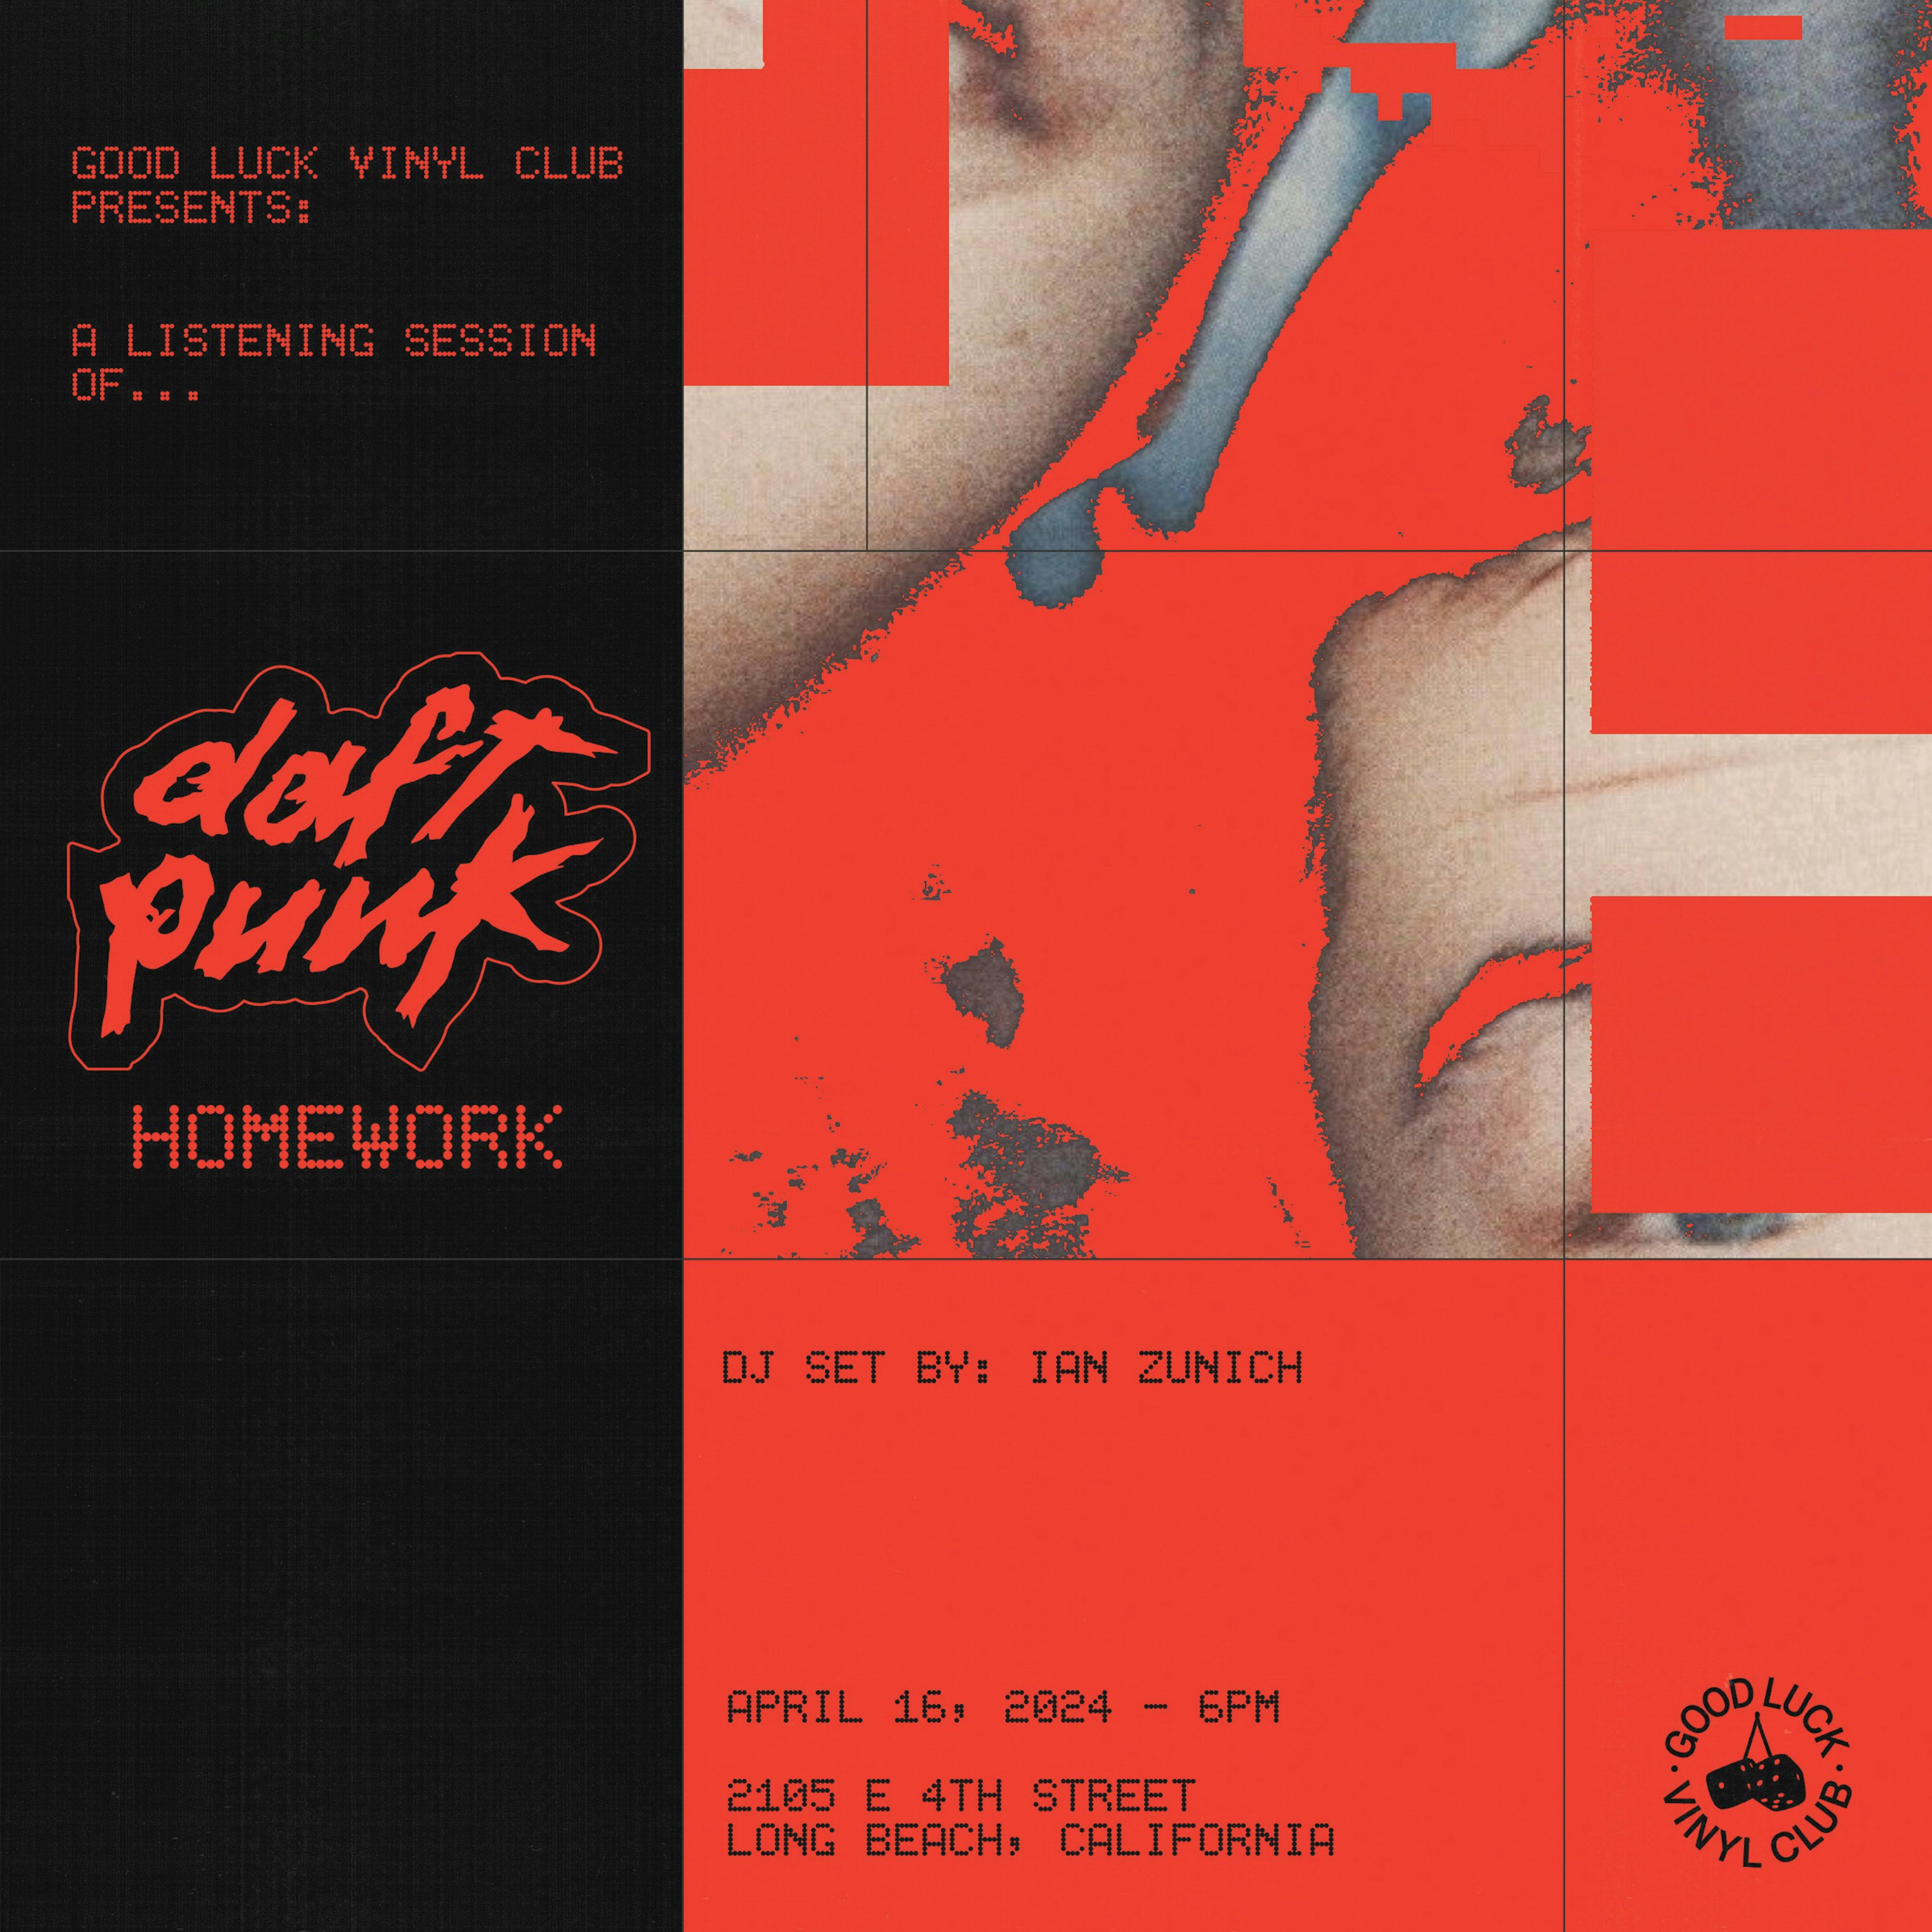 A Listening Session of Homework by Daft Punk